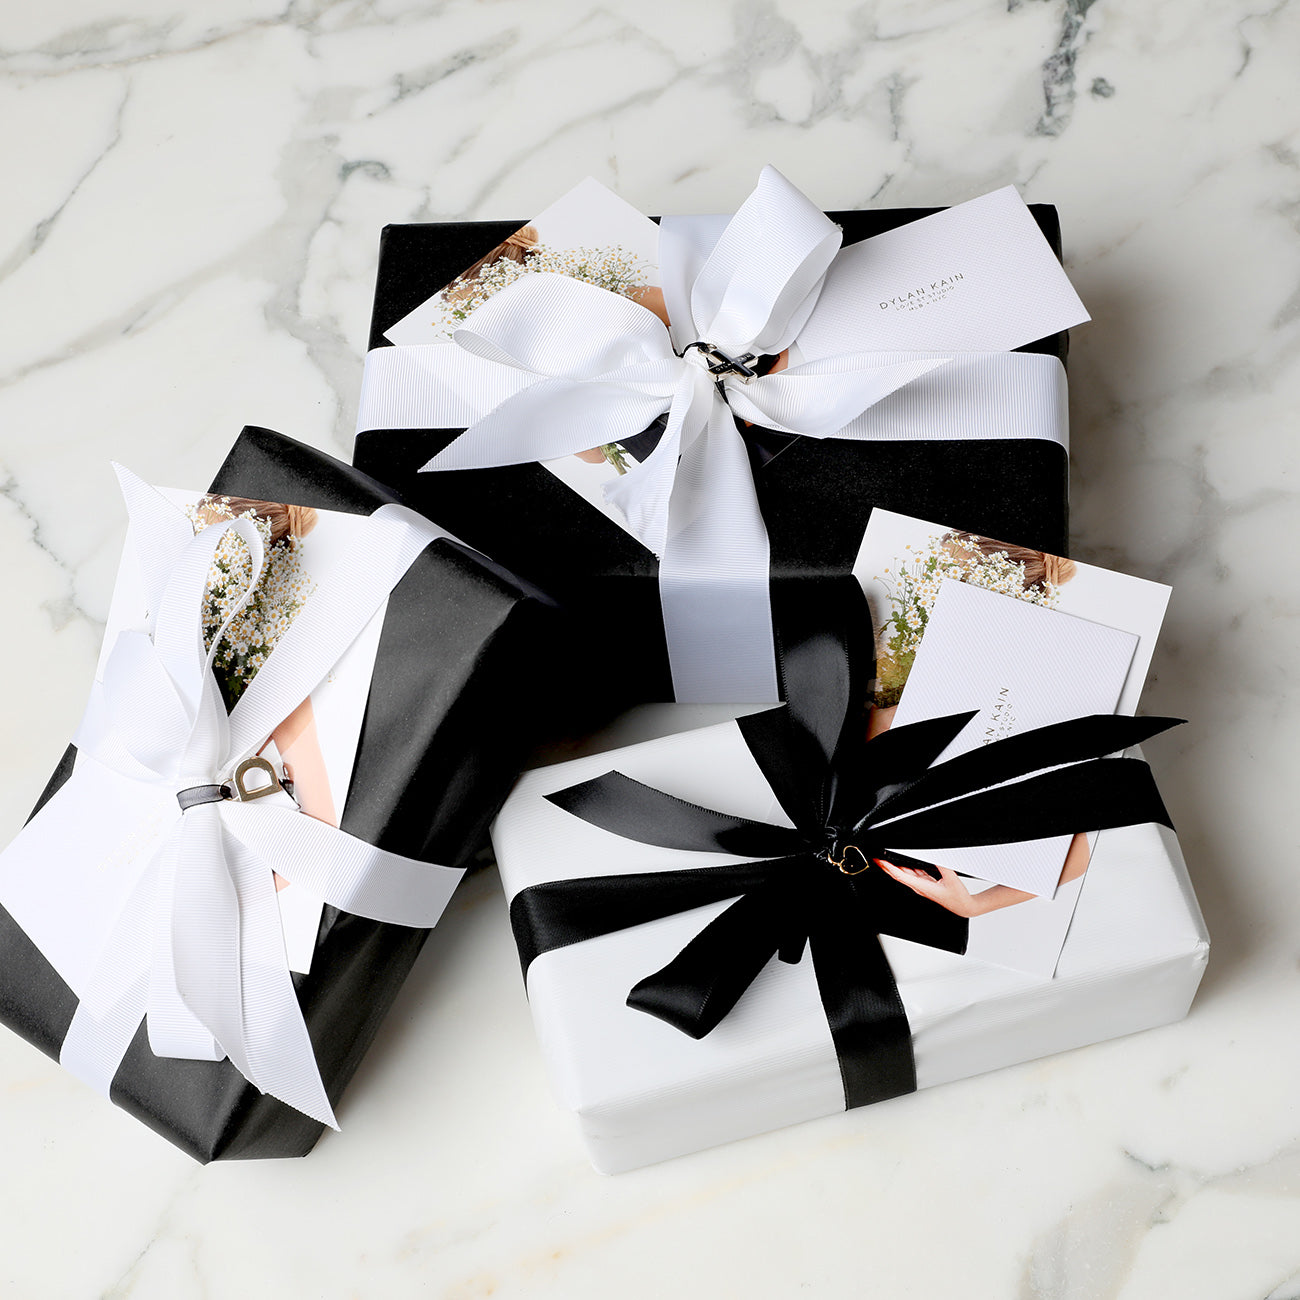 Luxury Gift Wrapping $20.00